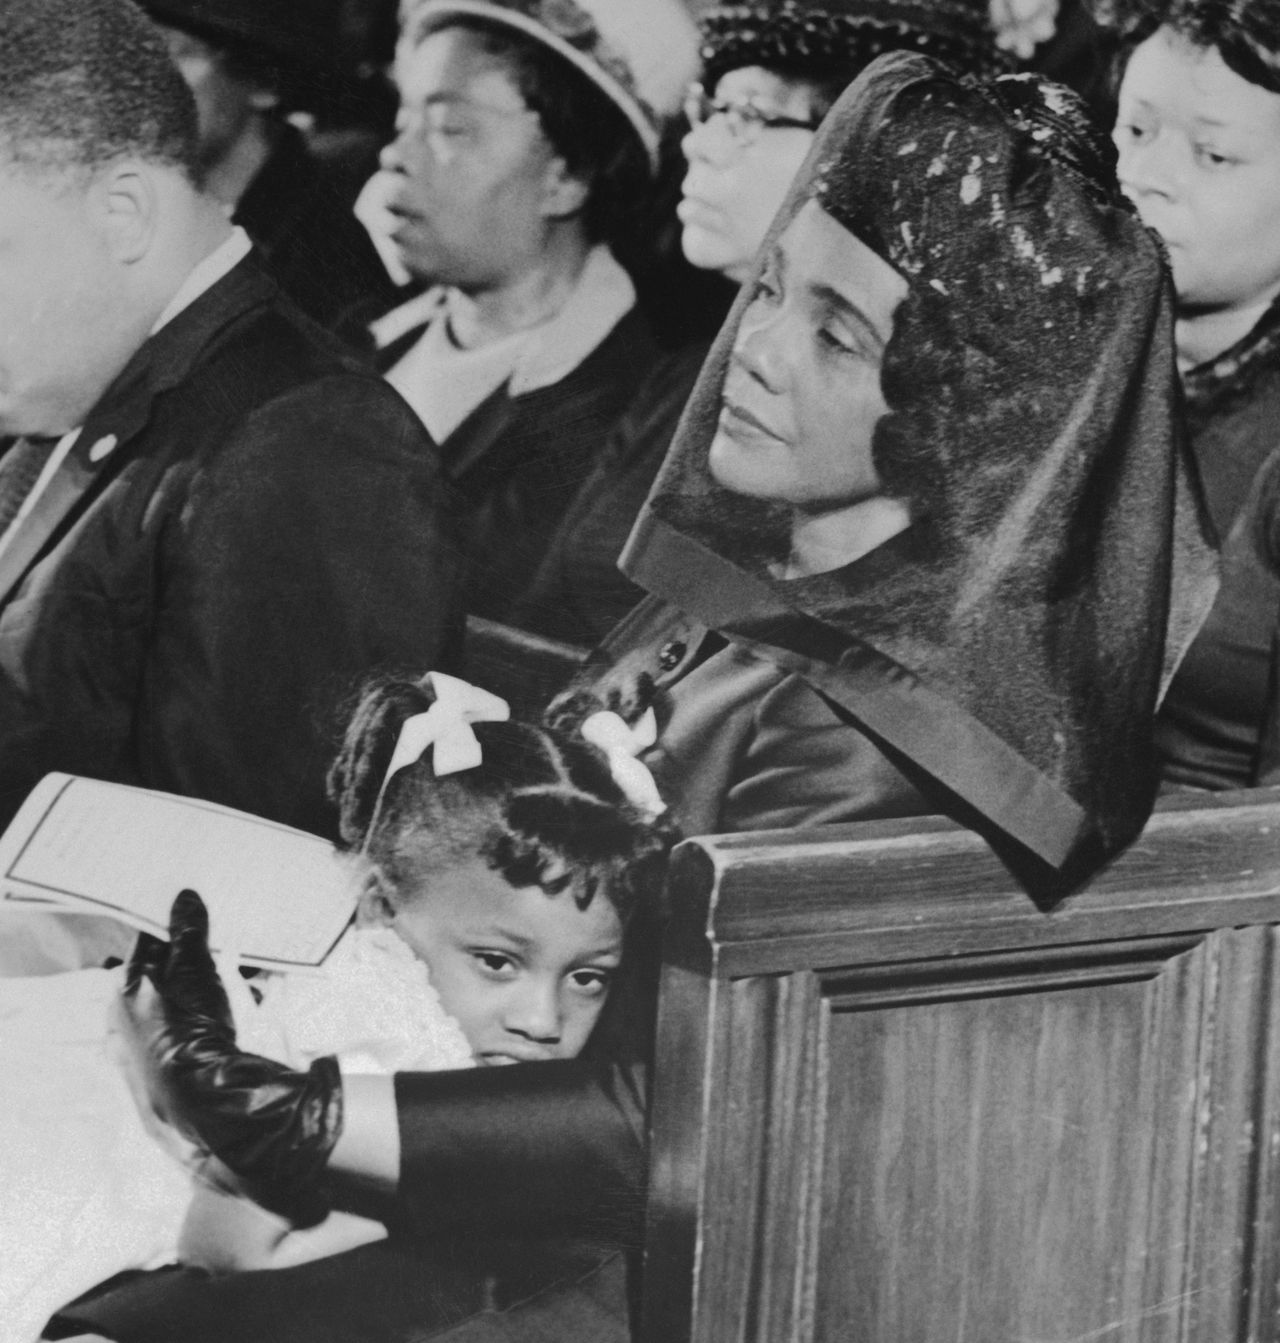 Coretta Scott King comforts her youngest daughter, 5-year-old Bernice, during the funeral service for Dr. Martin Luther King Jr. at Ebenezer Baptist Church in Atlanta.